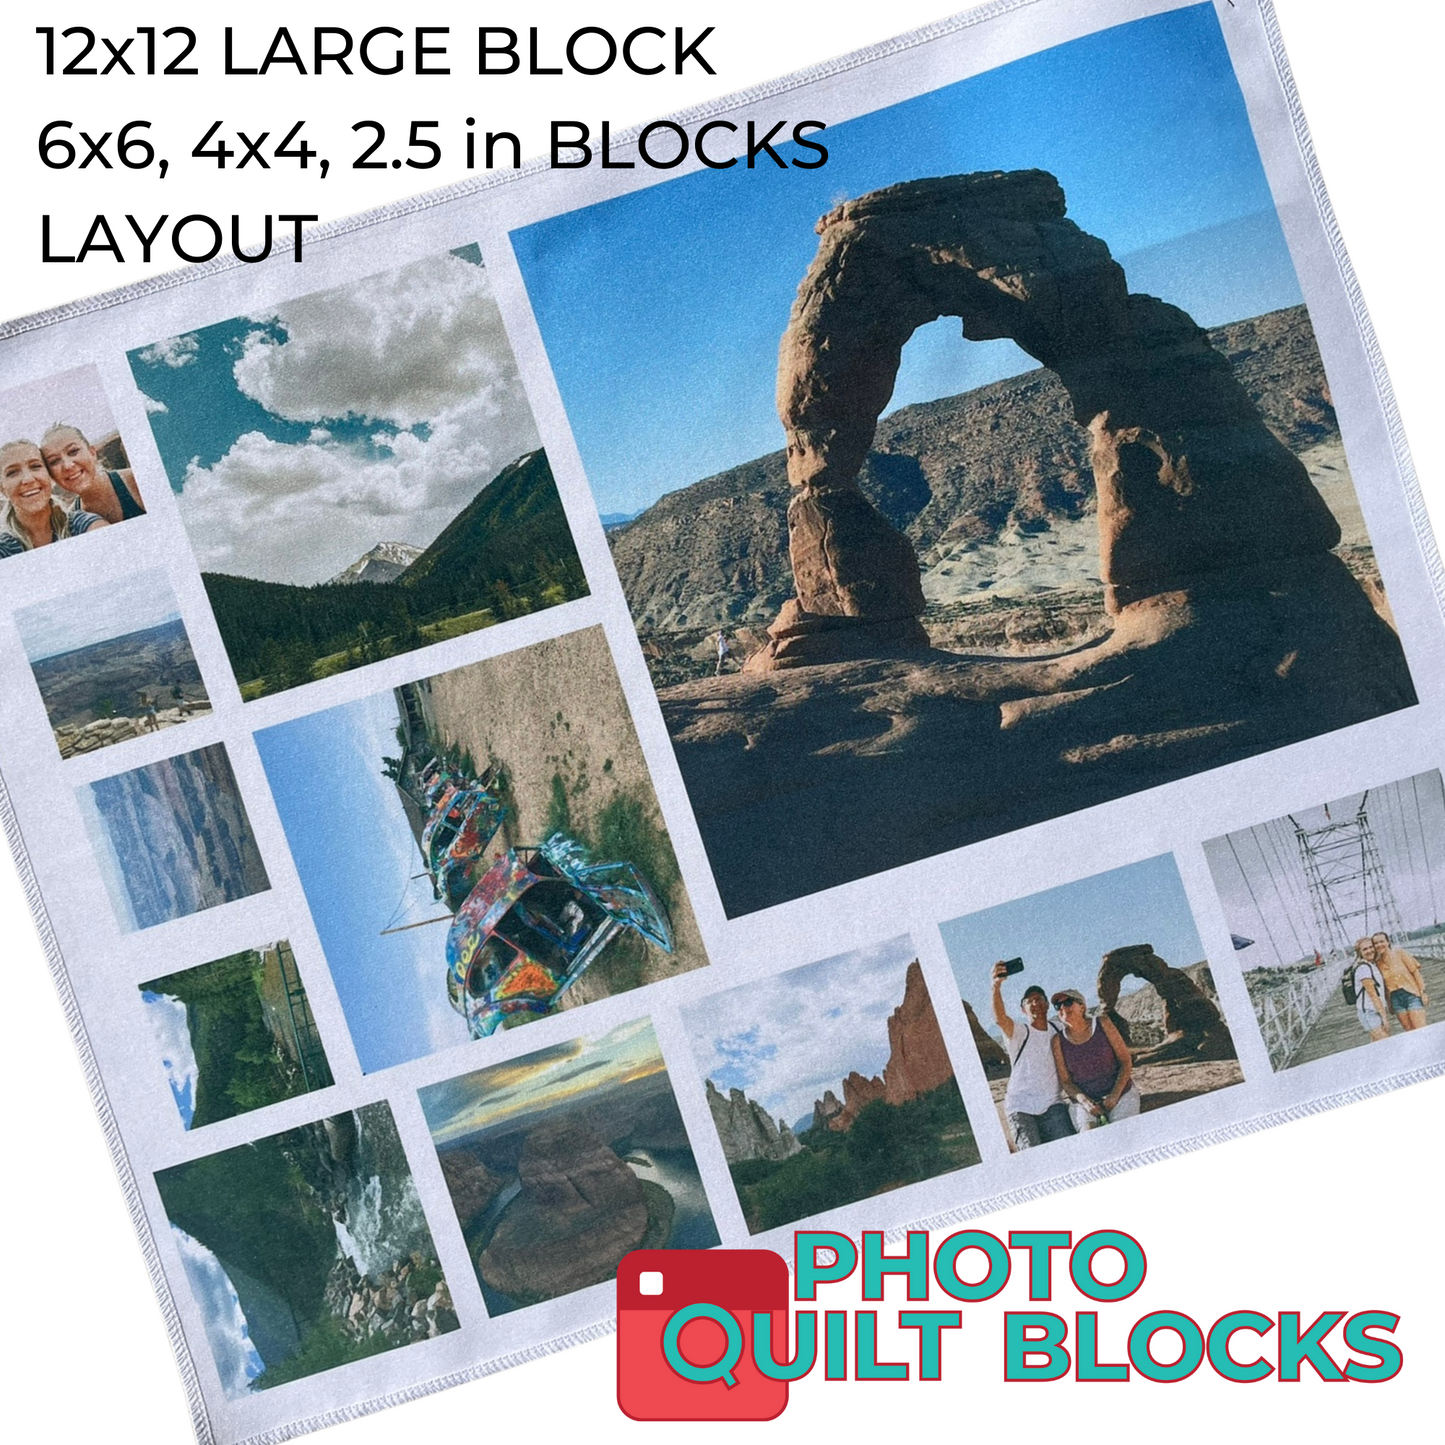 12 x 12 Fat Quarter Fabric Layouts | The Thistle